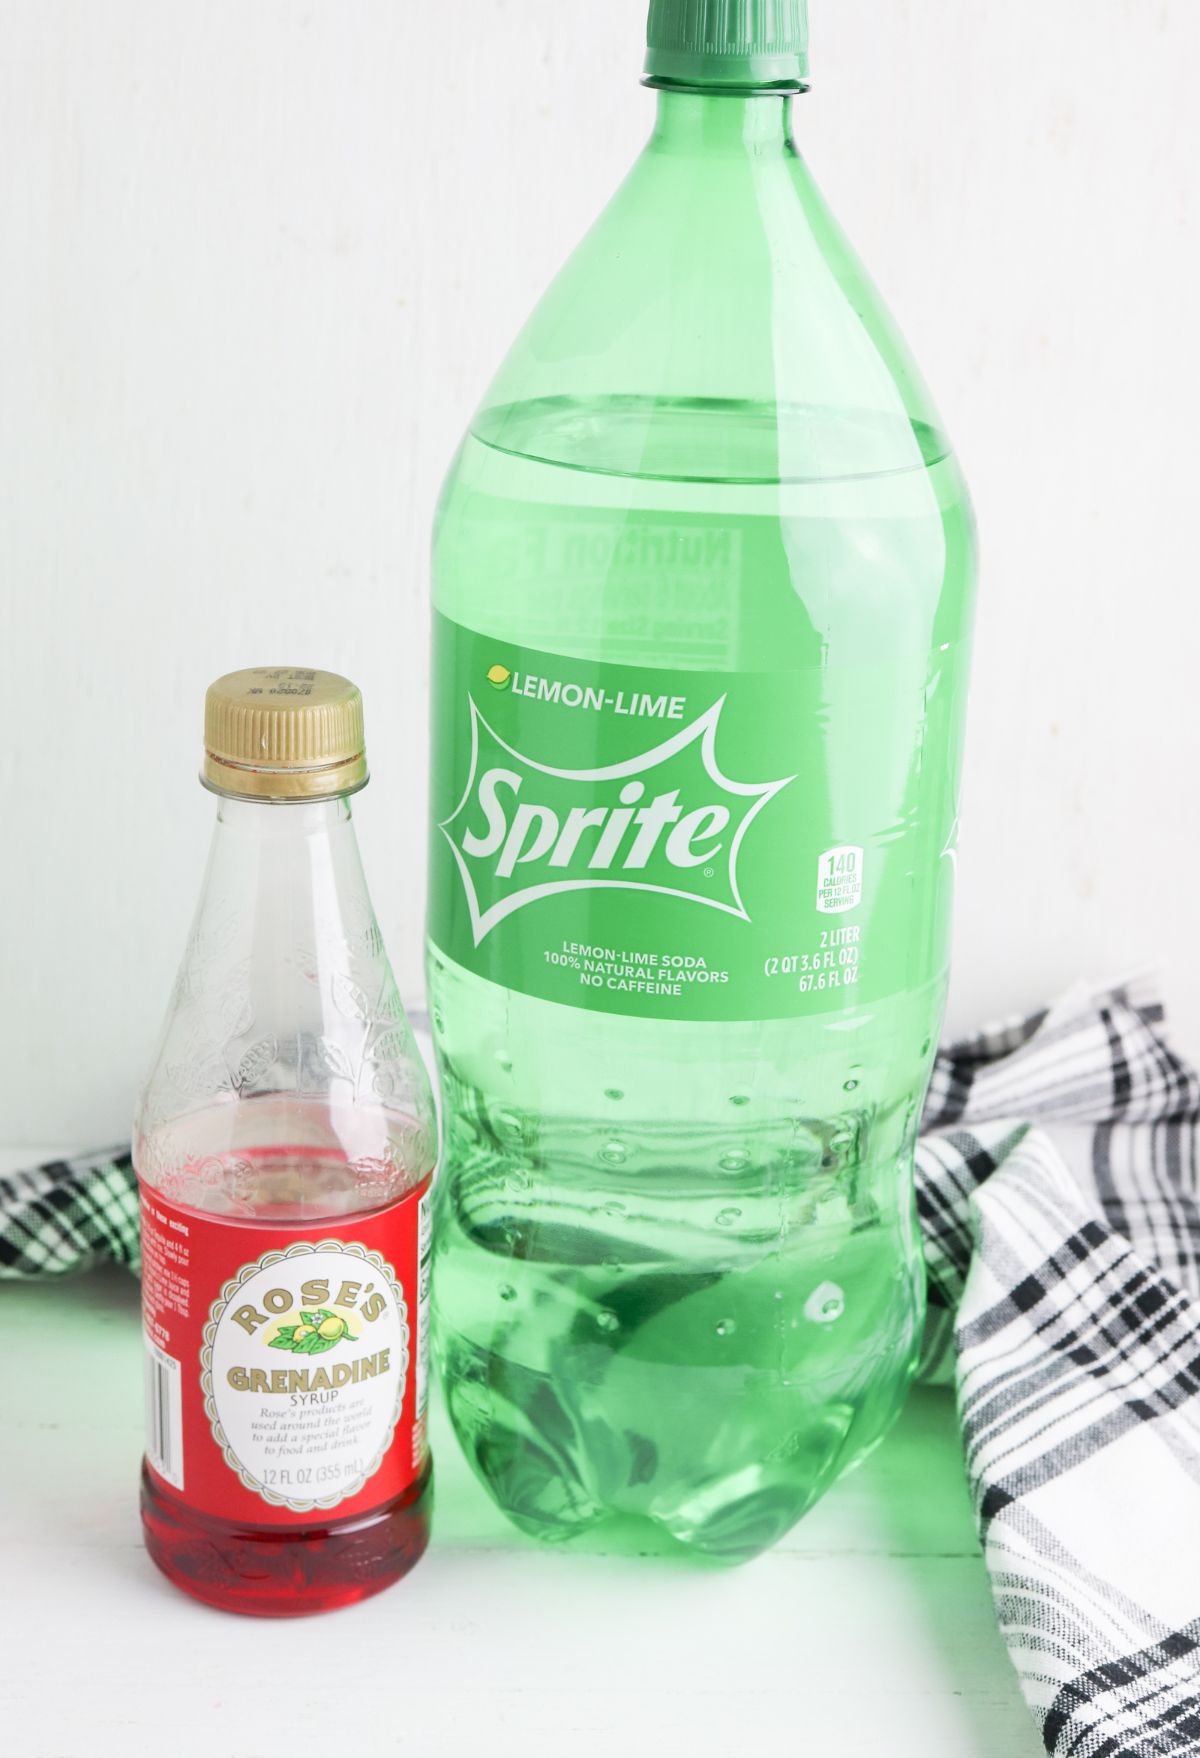 A bottle of sprite and a bottle of GRENADINE.